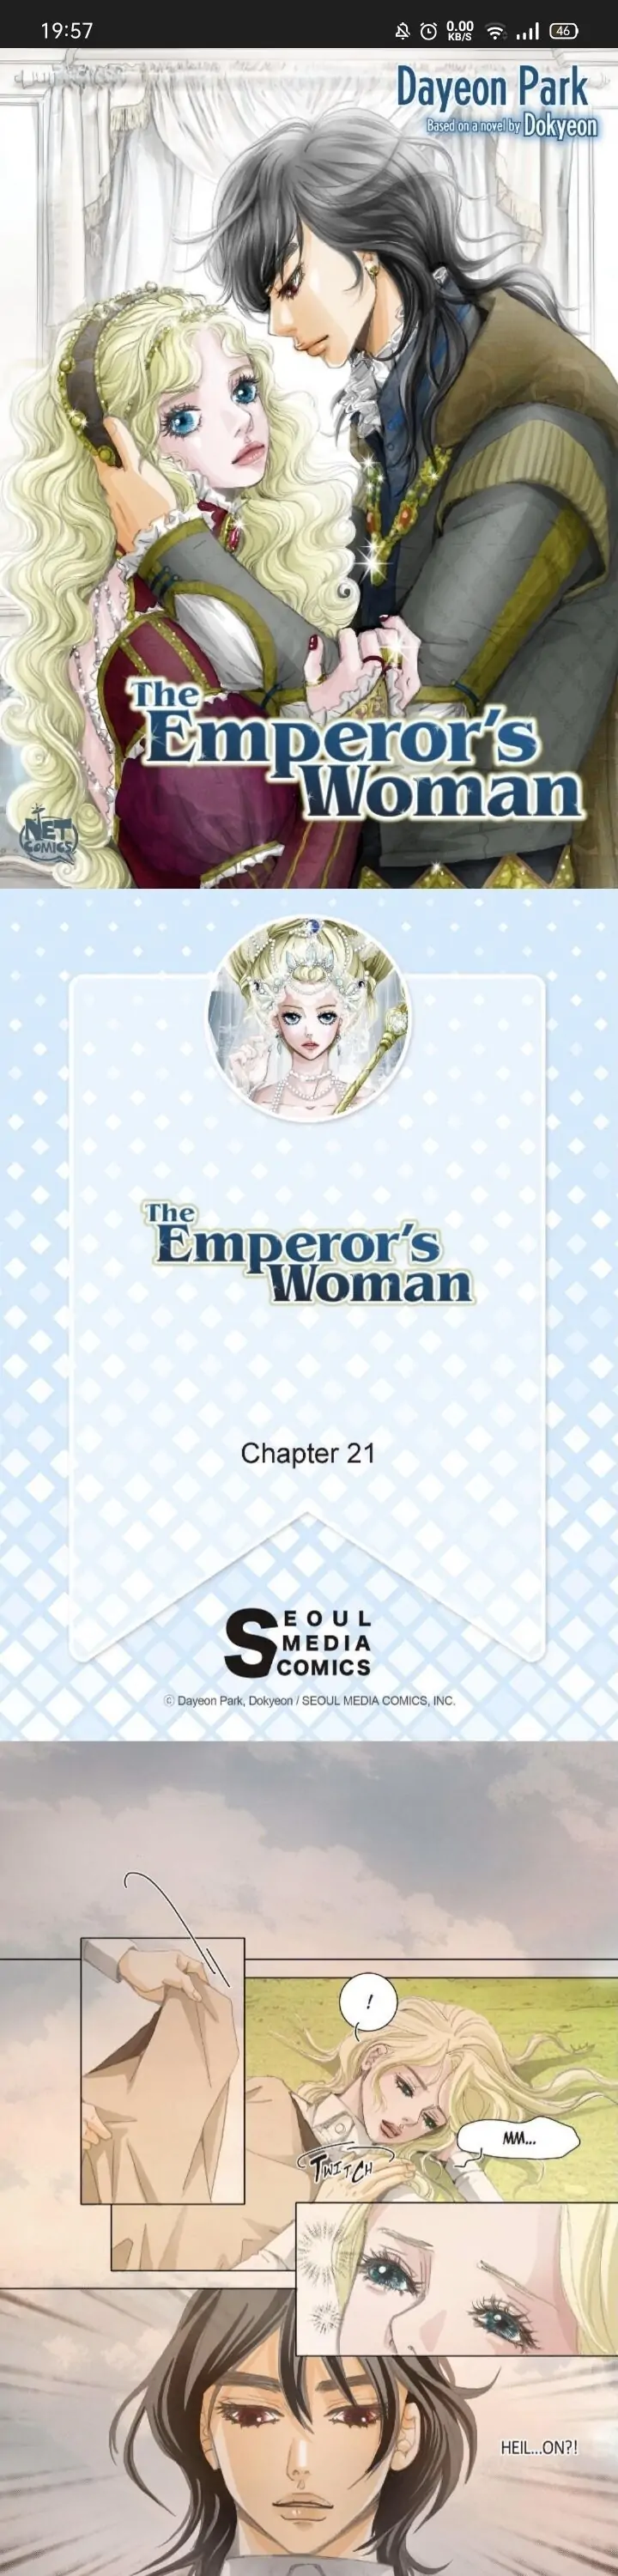 The Emperor’s Woman chapter 21